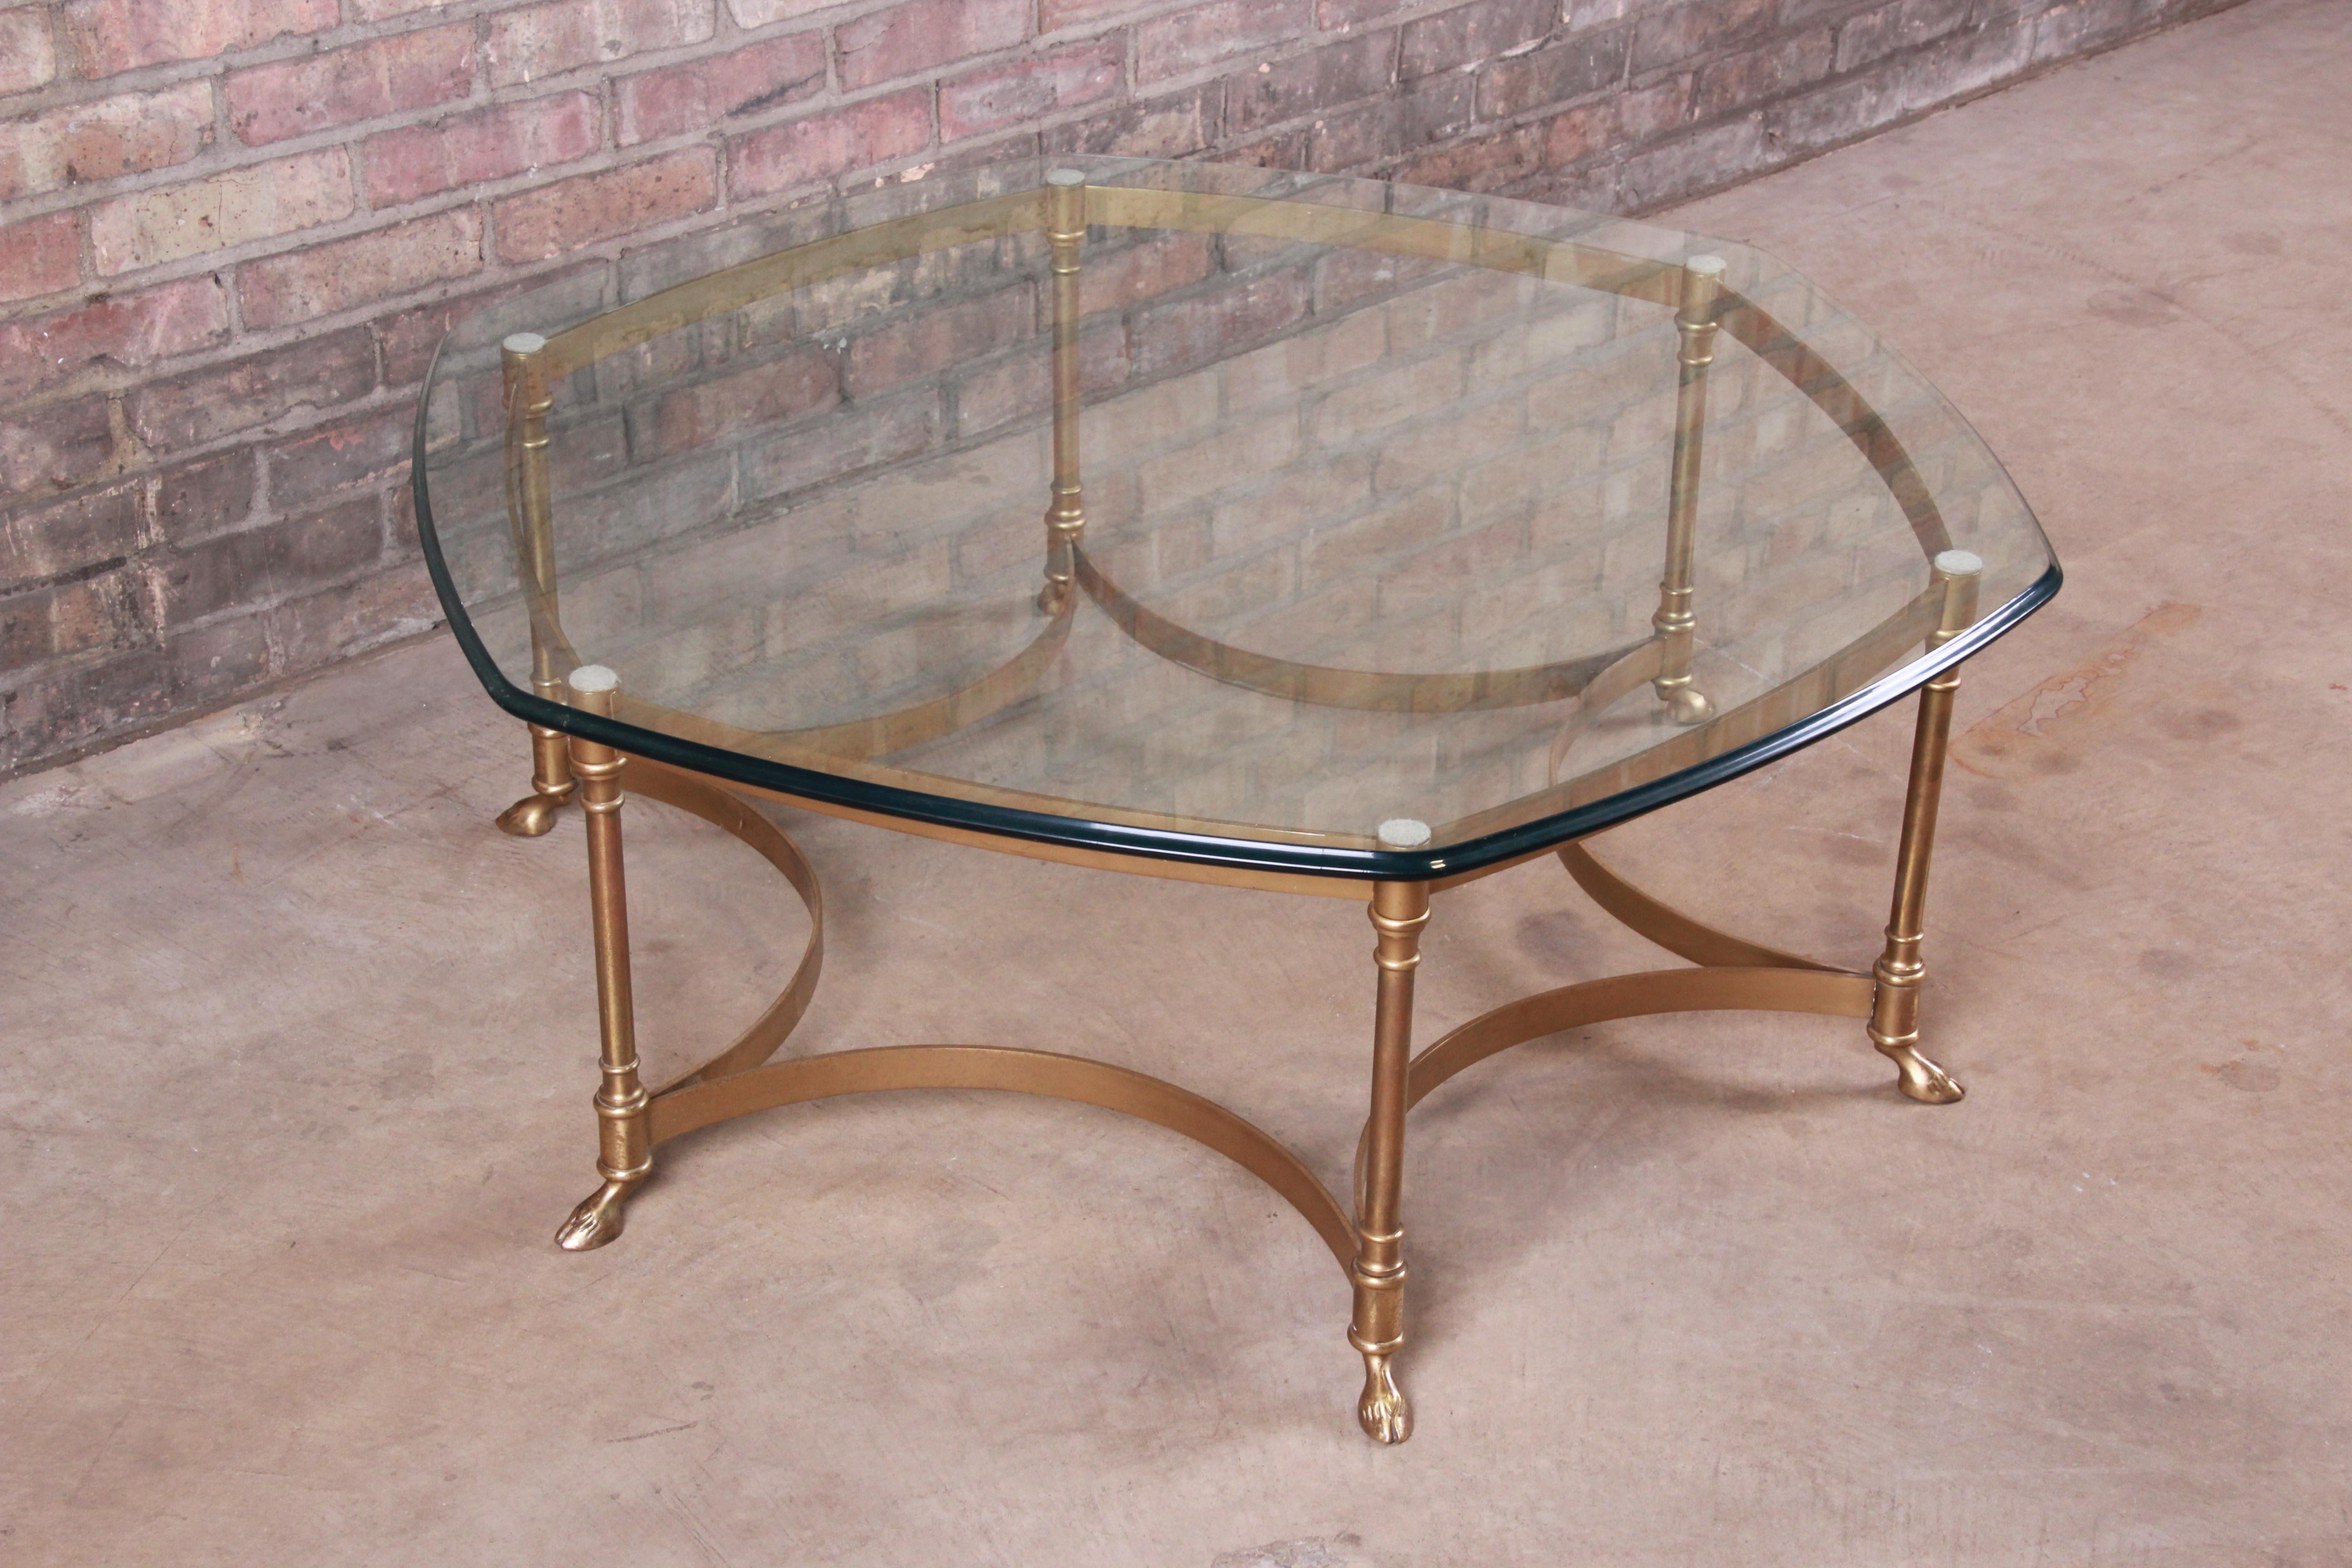 Labarge Hollywood Regency Brass and Glass Hooved Feet Cocktail Table, 1960s In Good Condition For Sale In South Bend, IN